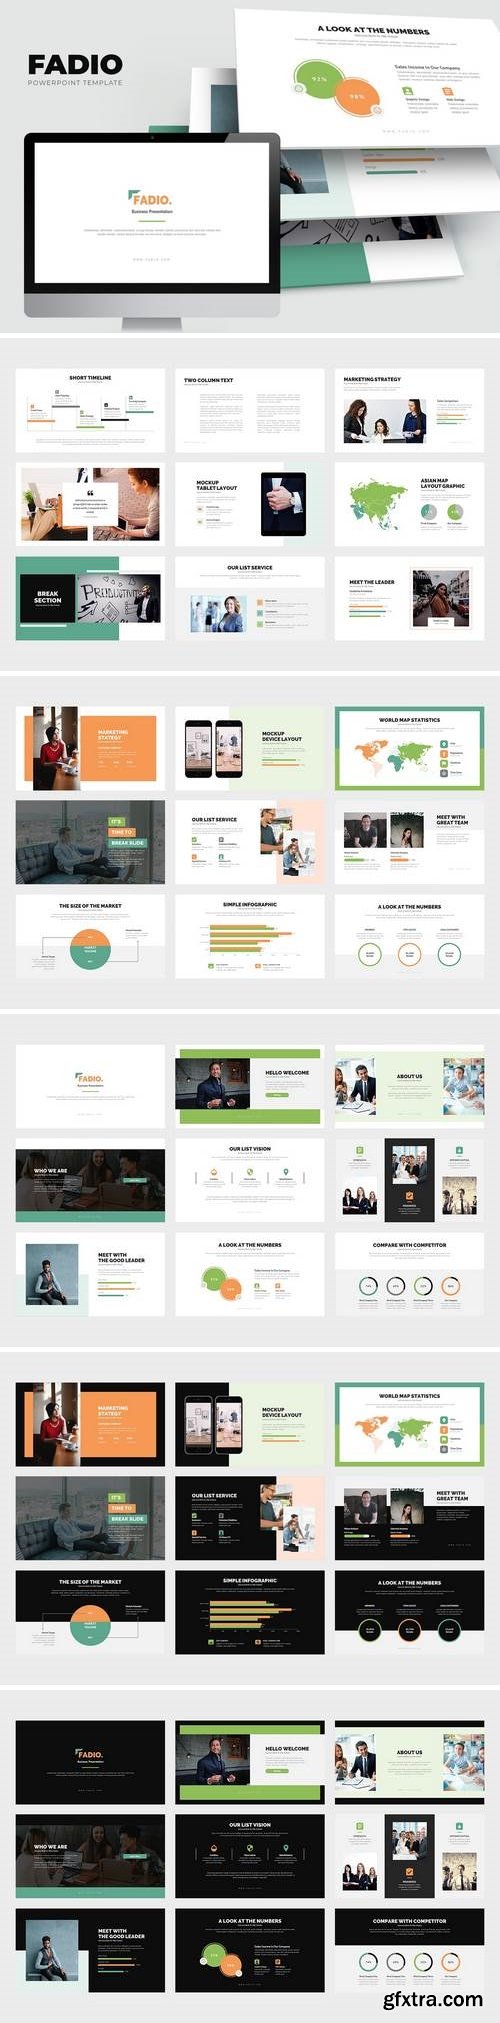 Fadio : Project Consultant Services Powerpoint